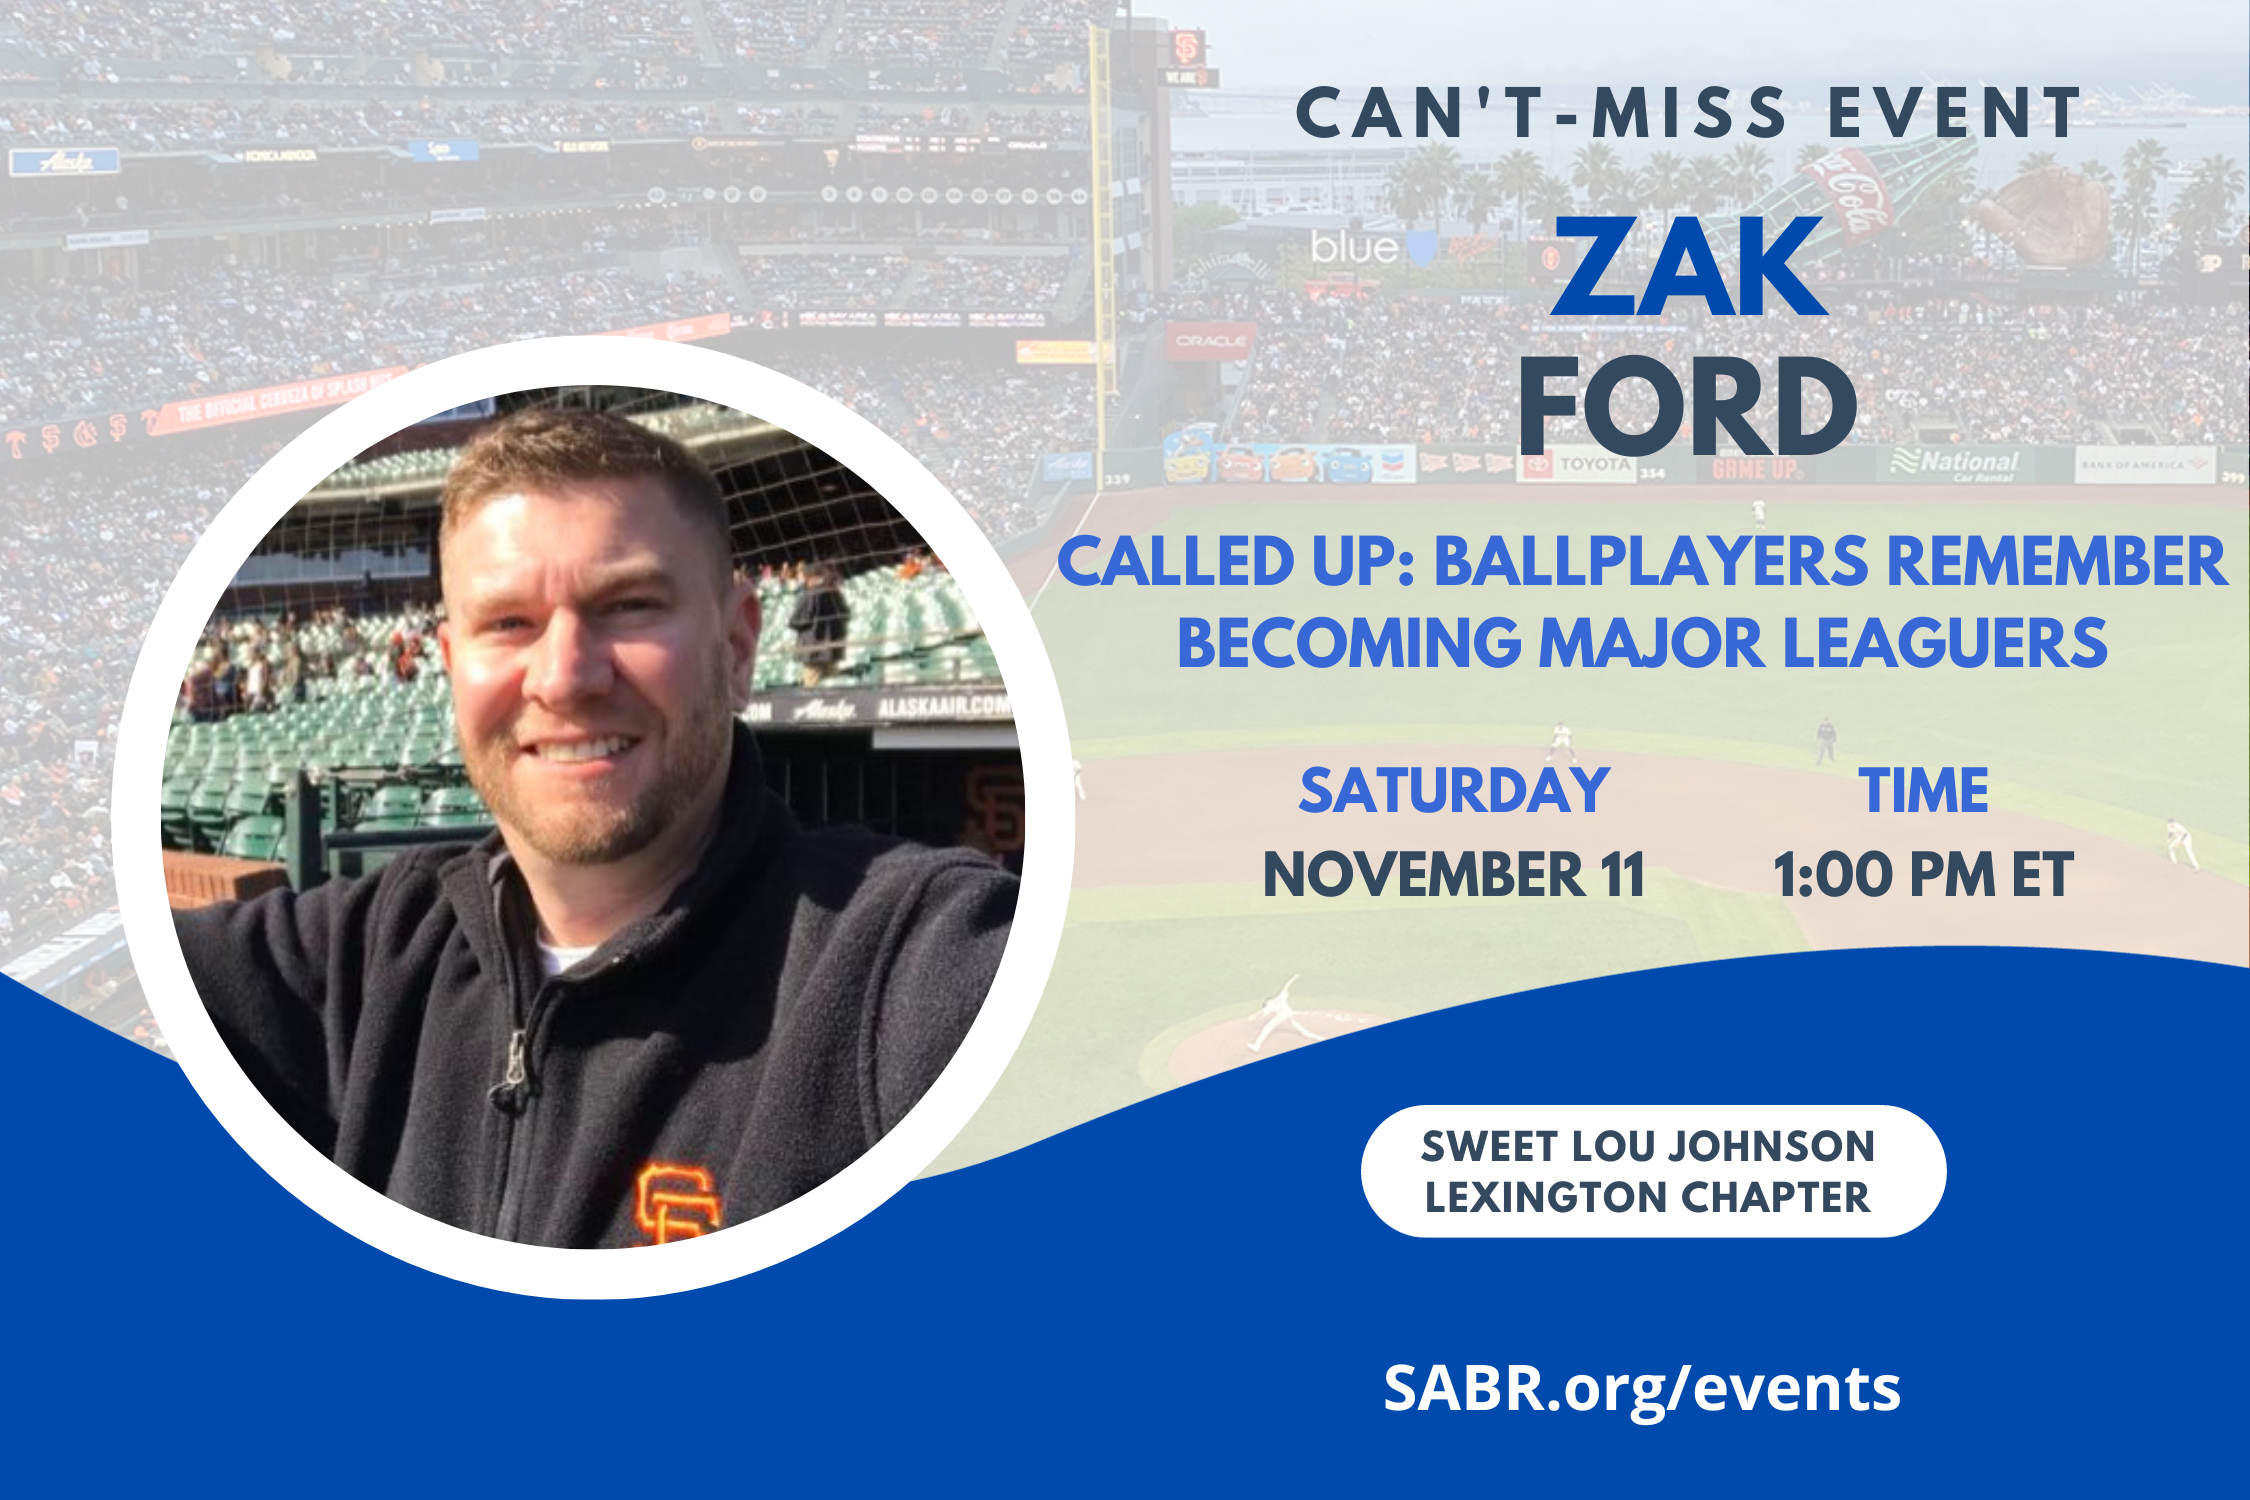 Join us for a virtual meeting of the Sweet Lou Johnson Lexington chapter of SABR at 1:00 p.m. Eastern on Saturday, November 11, 2023. Our guest is author Zak Ford on his new book, "Called Up."   

WHEN: 1 pm, Saturday, November 11, 2023

GUEST SPEAKER:Zak Ford, author of Called Up: Ballplayers Remember Becoming Major Leaguers 